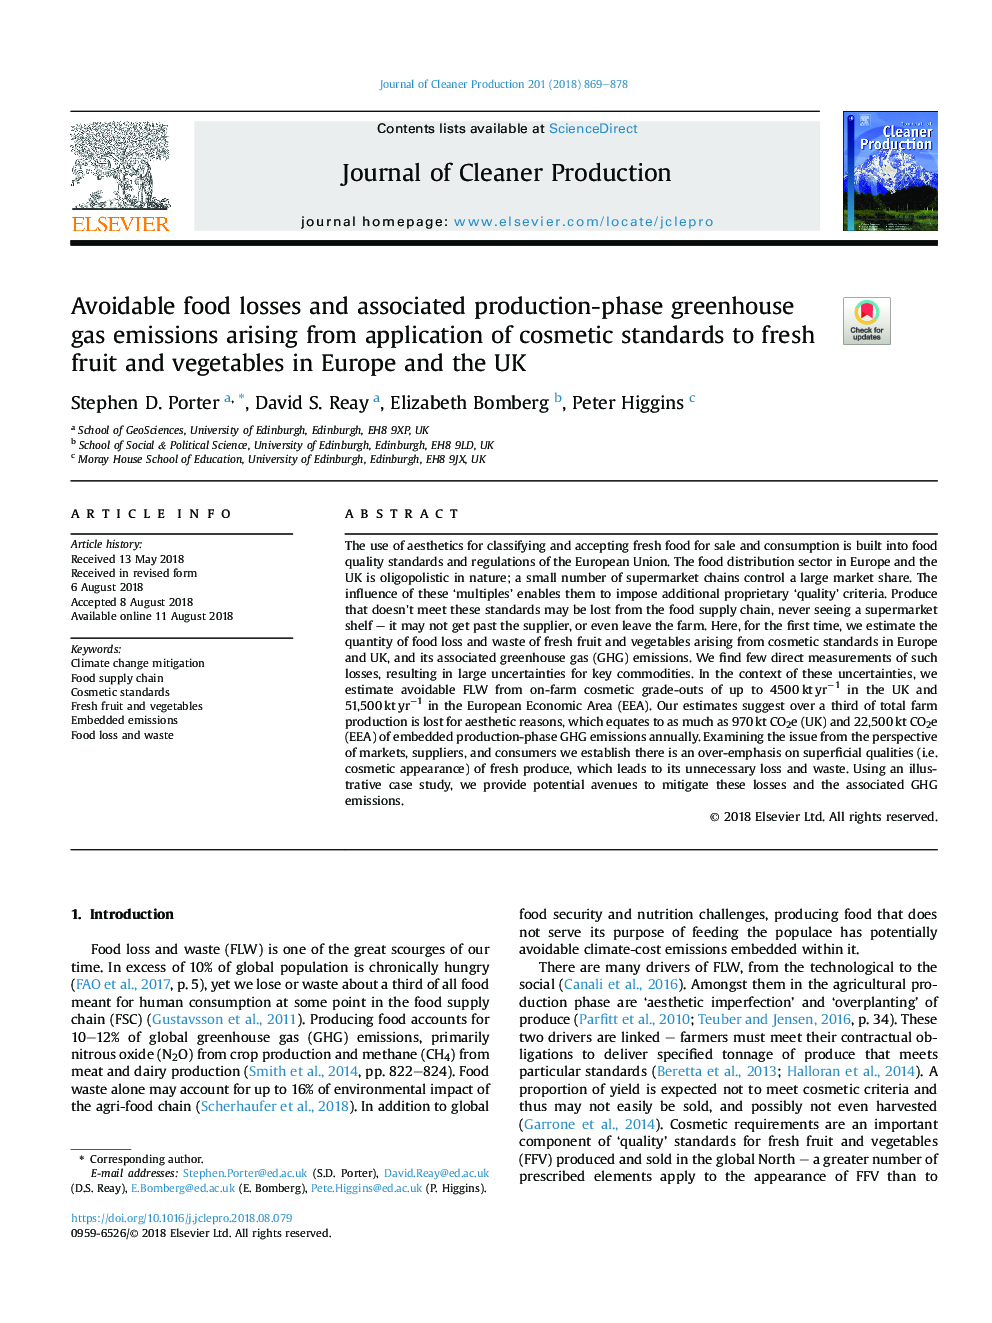 Avoidable food losses and associated production-phase greenhouse gas emissions arising from application of cosmetic standards to fresh fruit and vegetables in Europe and the UK